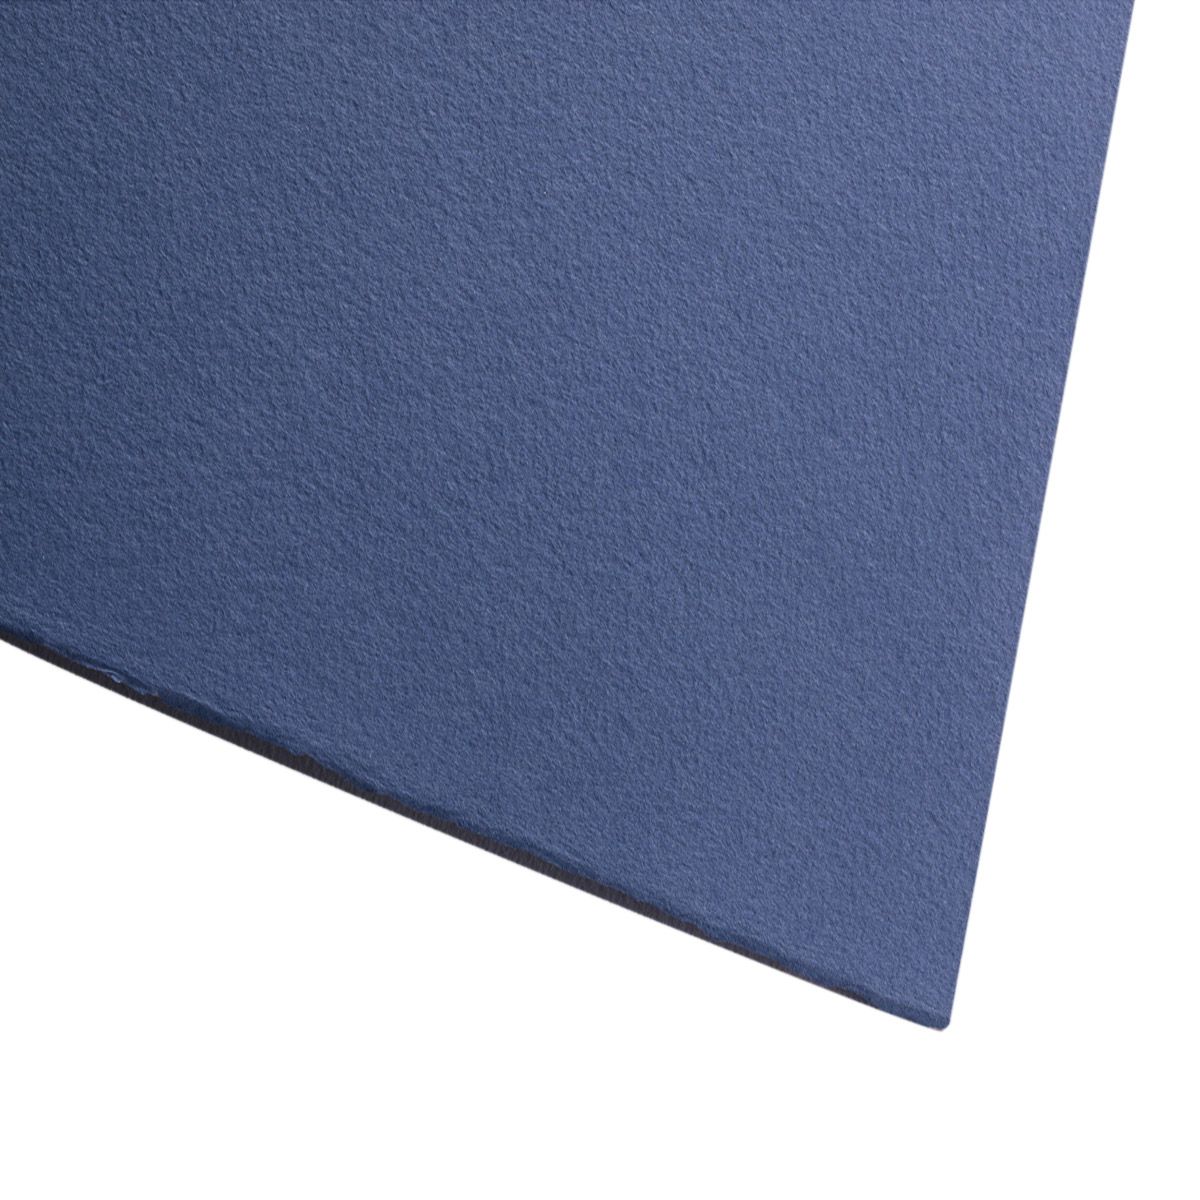 Fabriano Cromia Paper Sheet Blue 19.6